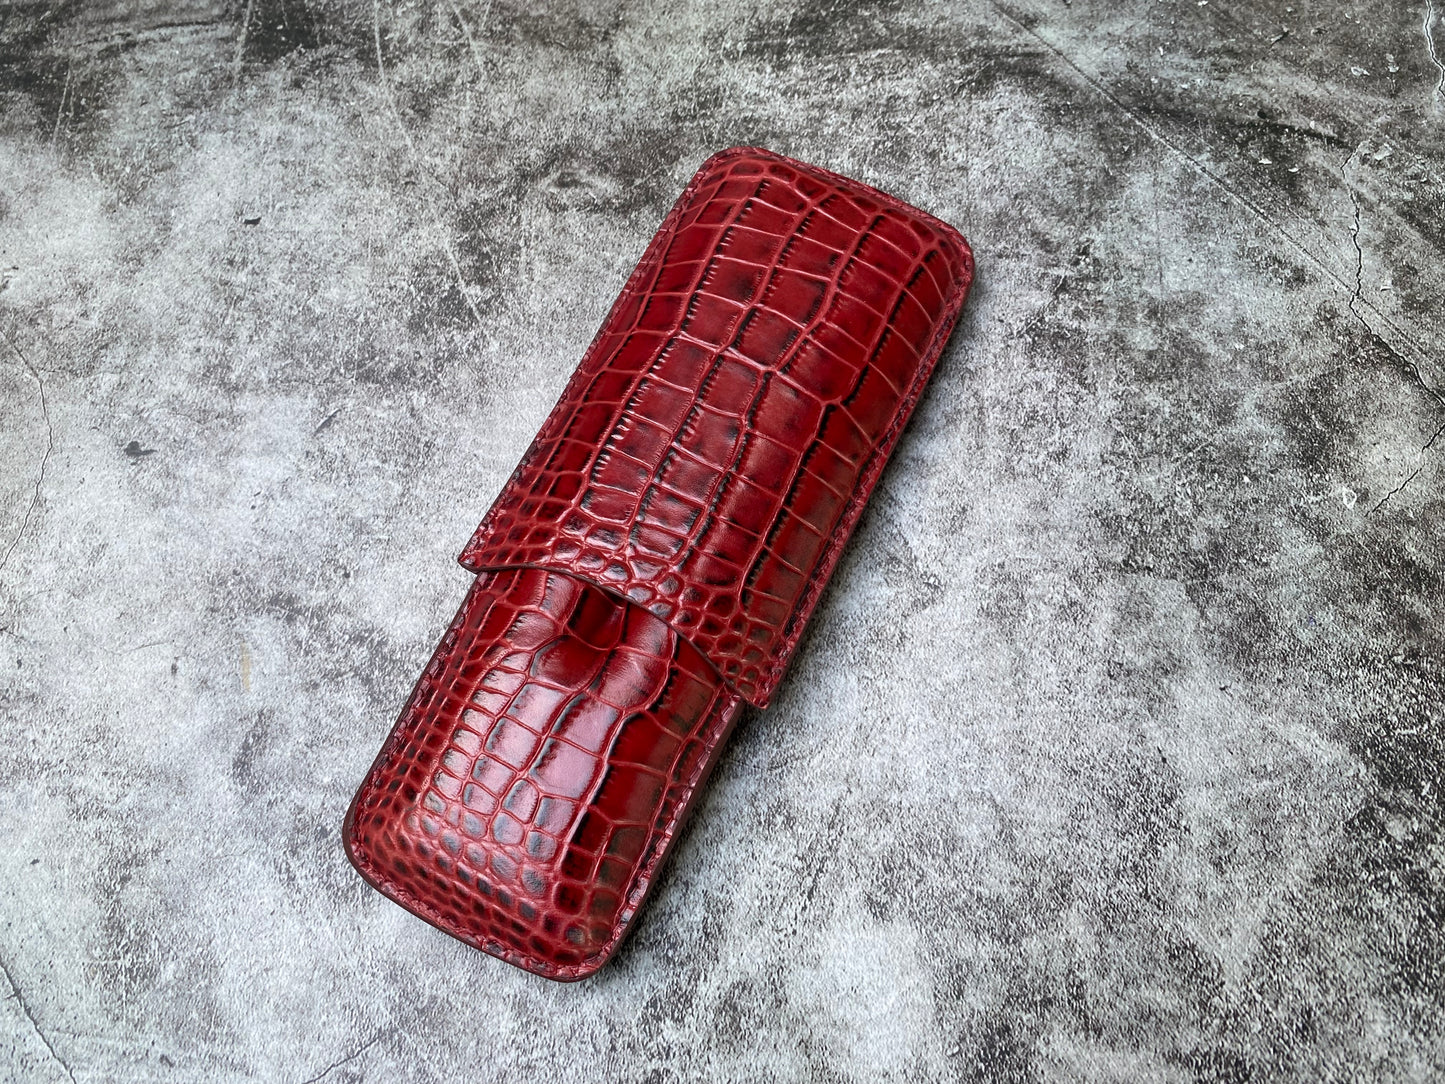 Handmade Red Italy Printed Cowhide Leather Cigar Case, Leather Cigar Humidor, 2 to 3 Tubes Cigar Case